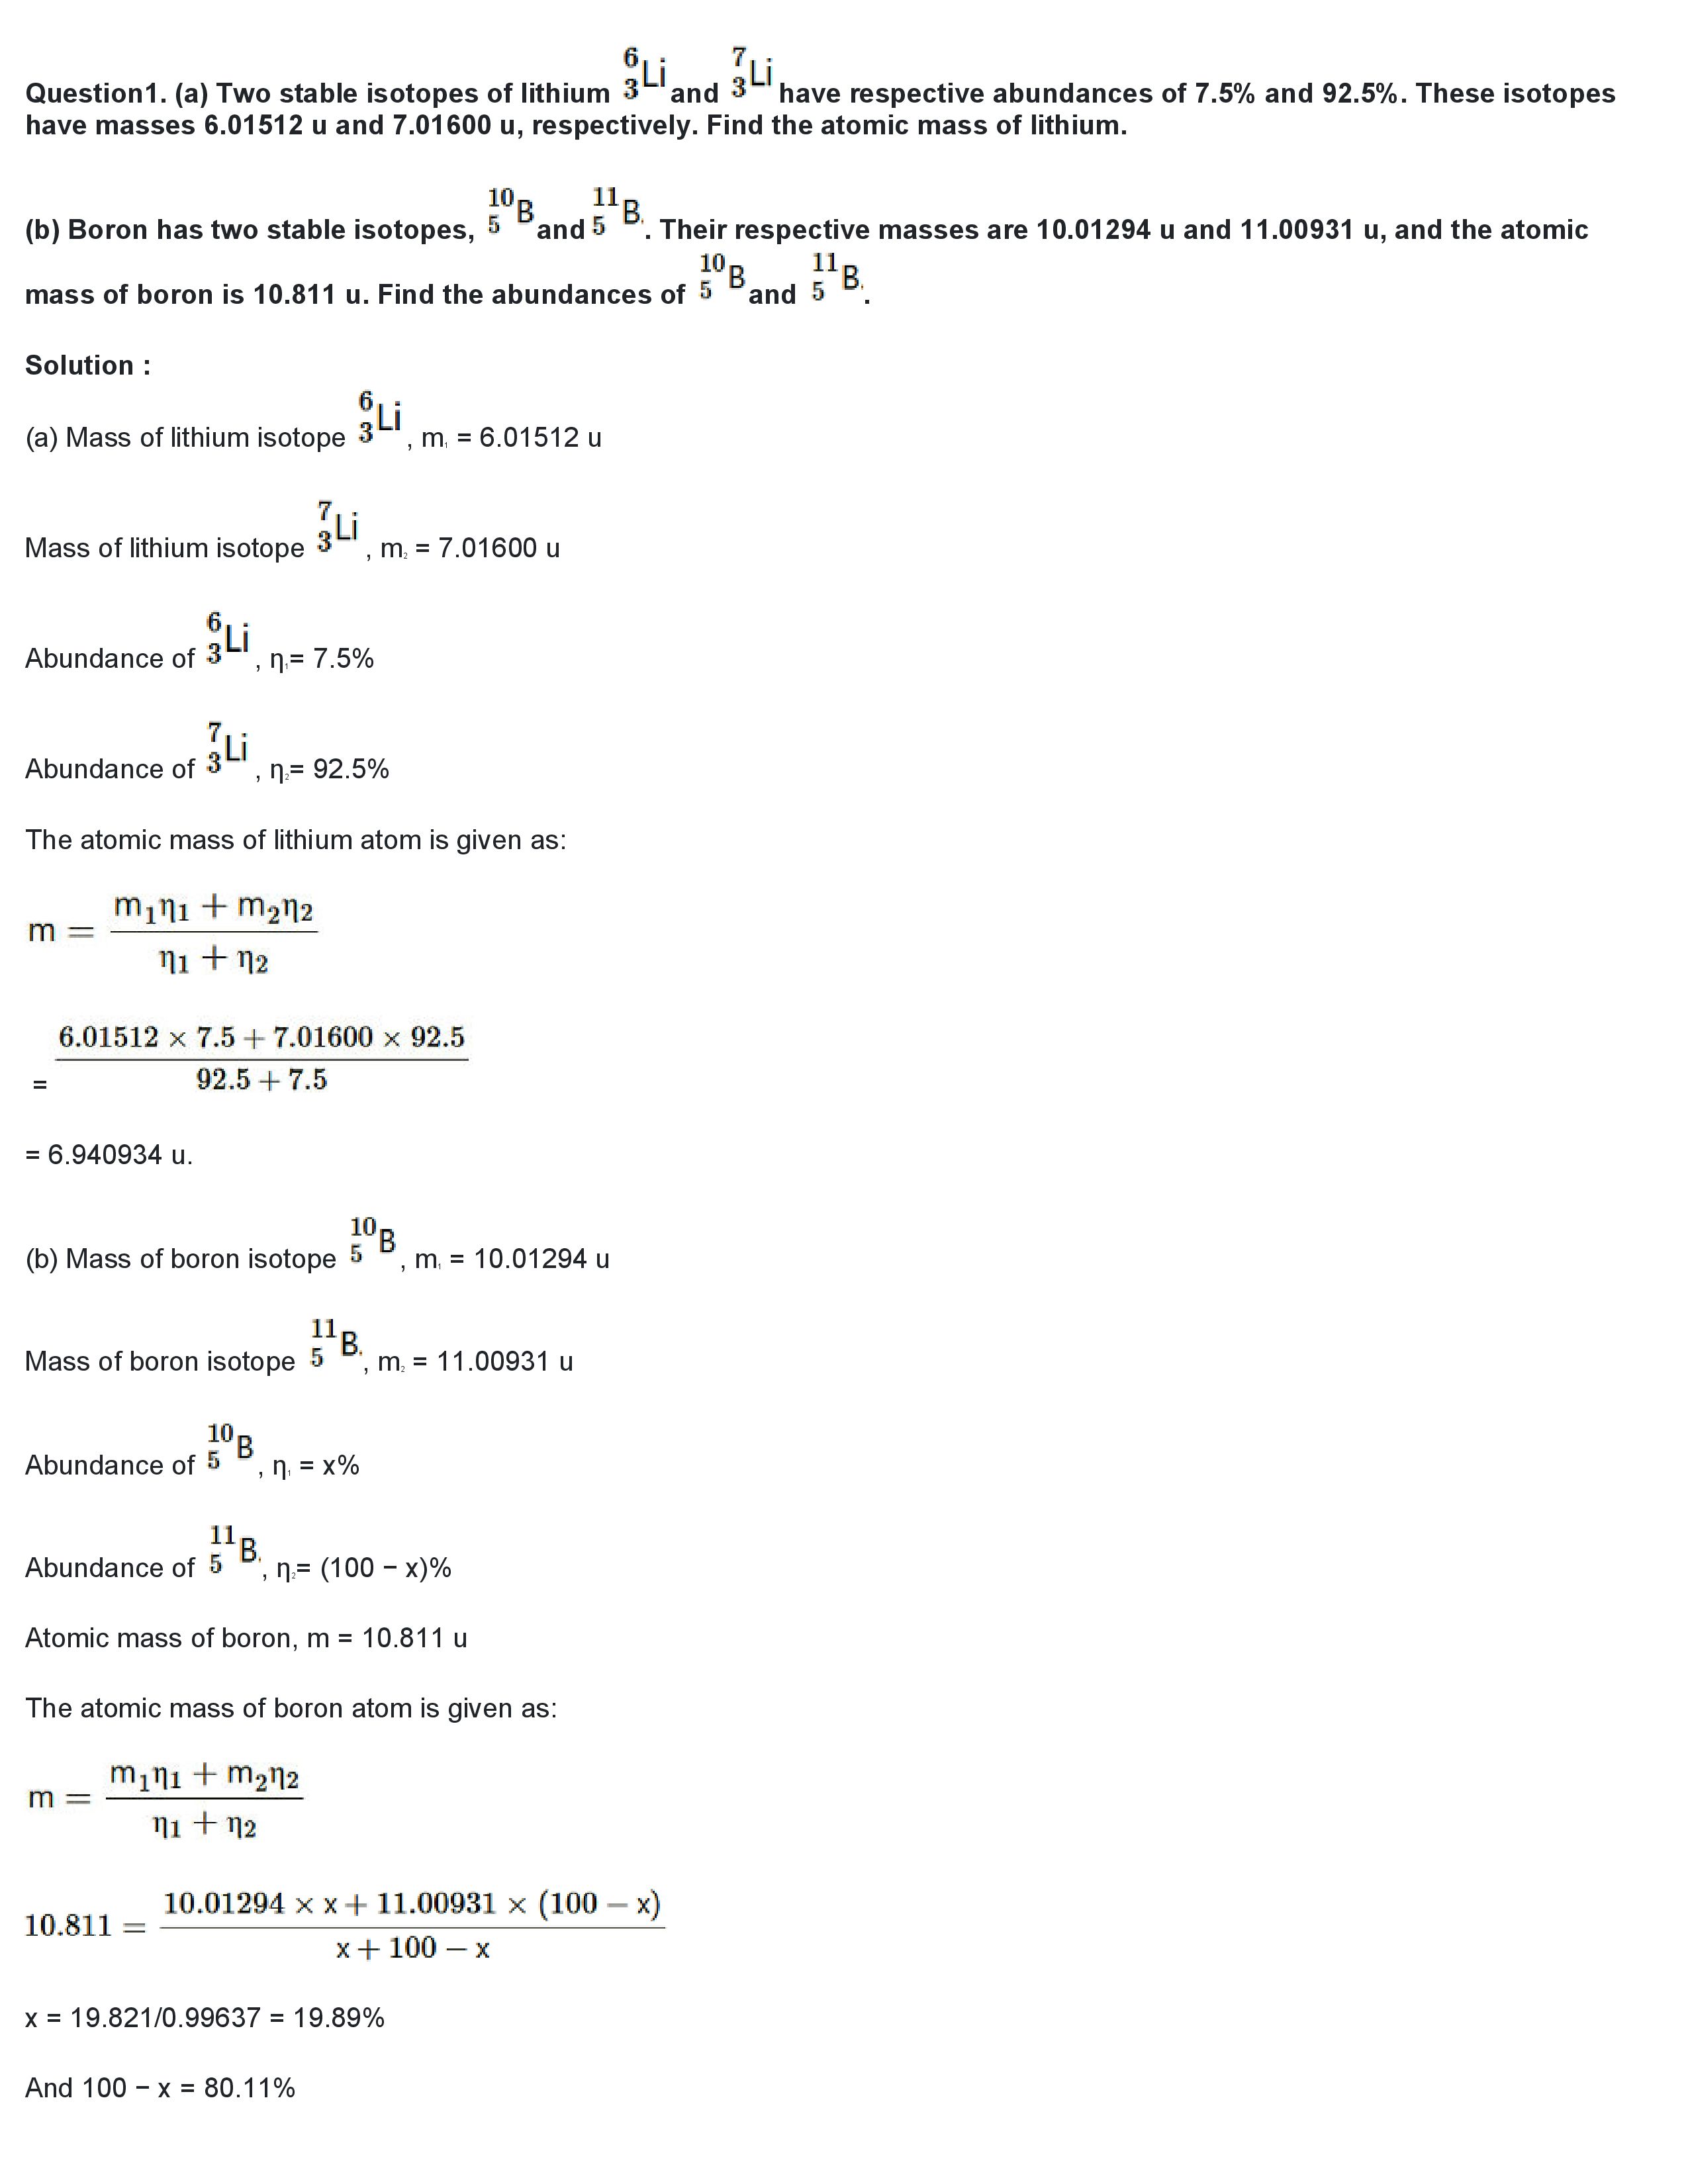 ""NCERT-Solutions-Class-12-Physics-Chapter-13-Nuclei-1